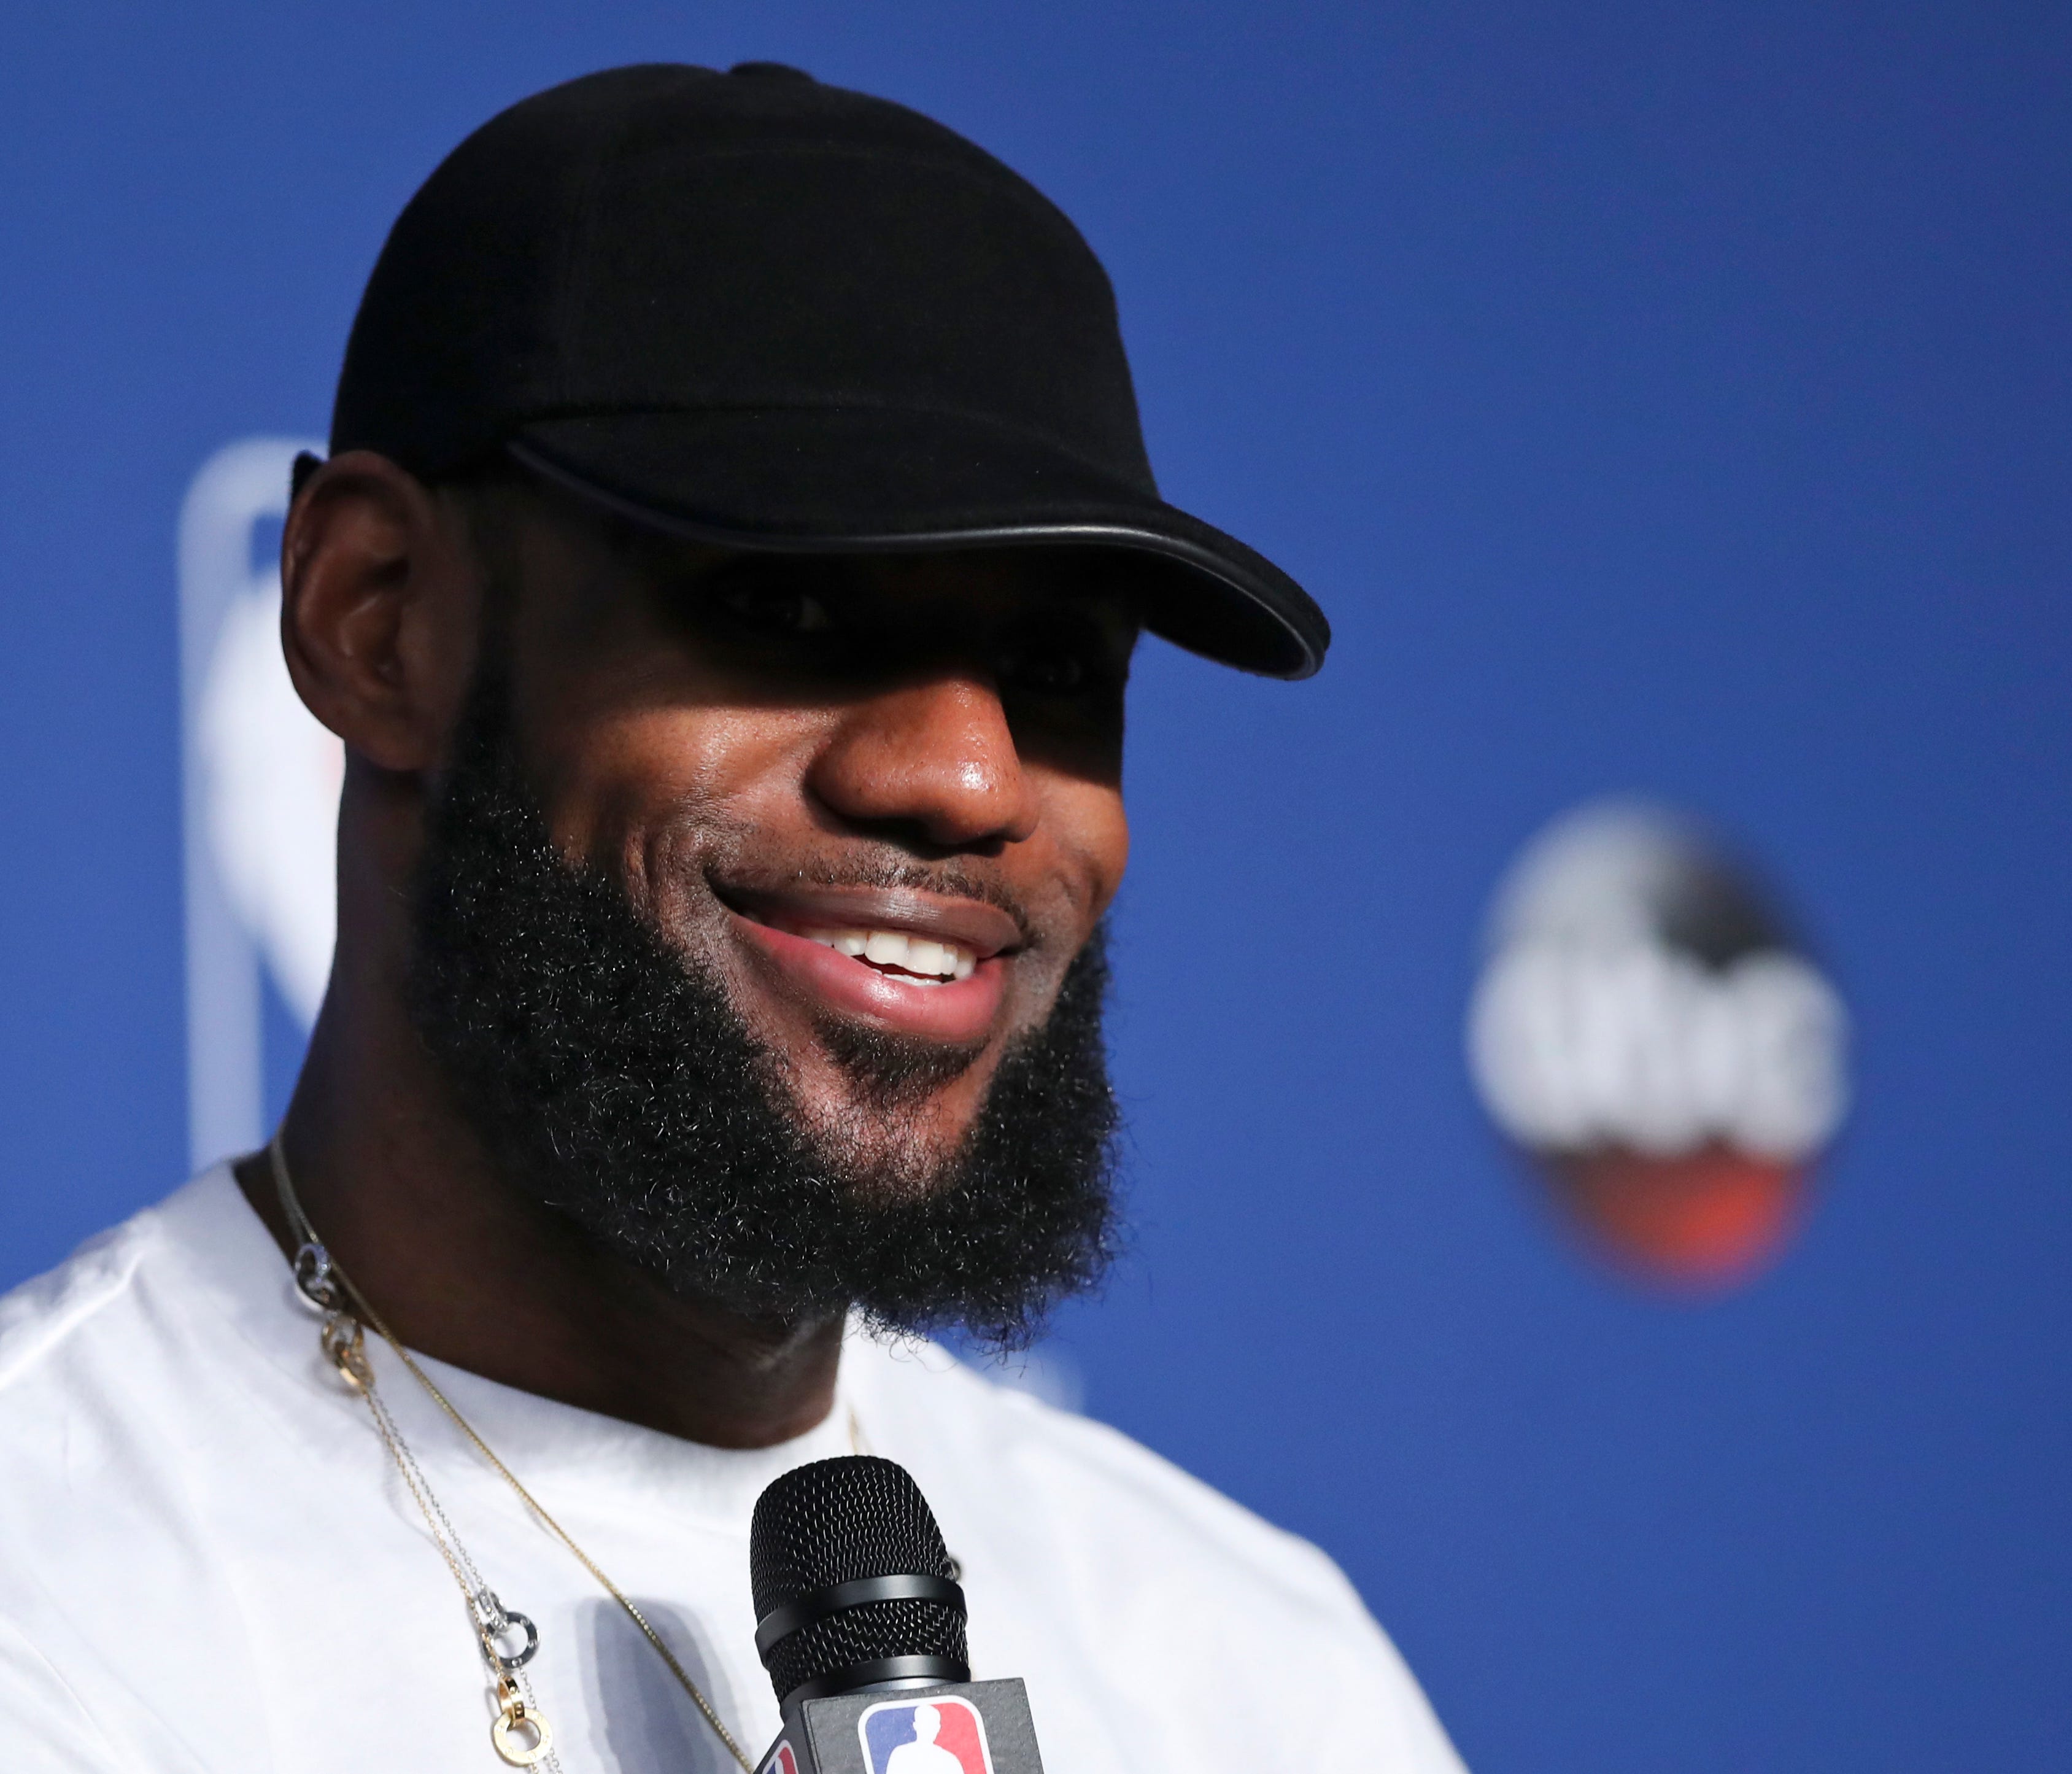 Cleveland Cavaliers forward LeBron James smiles during a news conference following Game 4 of basketball's NBA Finals against the Golden State Warriors, early Saturday, June 9, 2018, in Cleveland. The Warriors defeated the Cavaliers 108-85 to sweep th